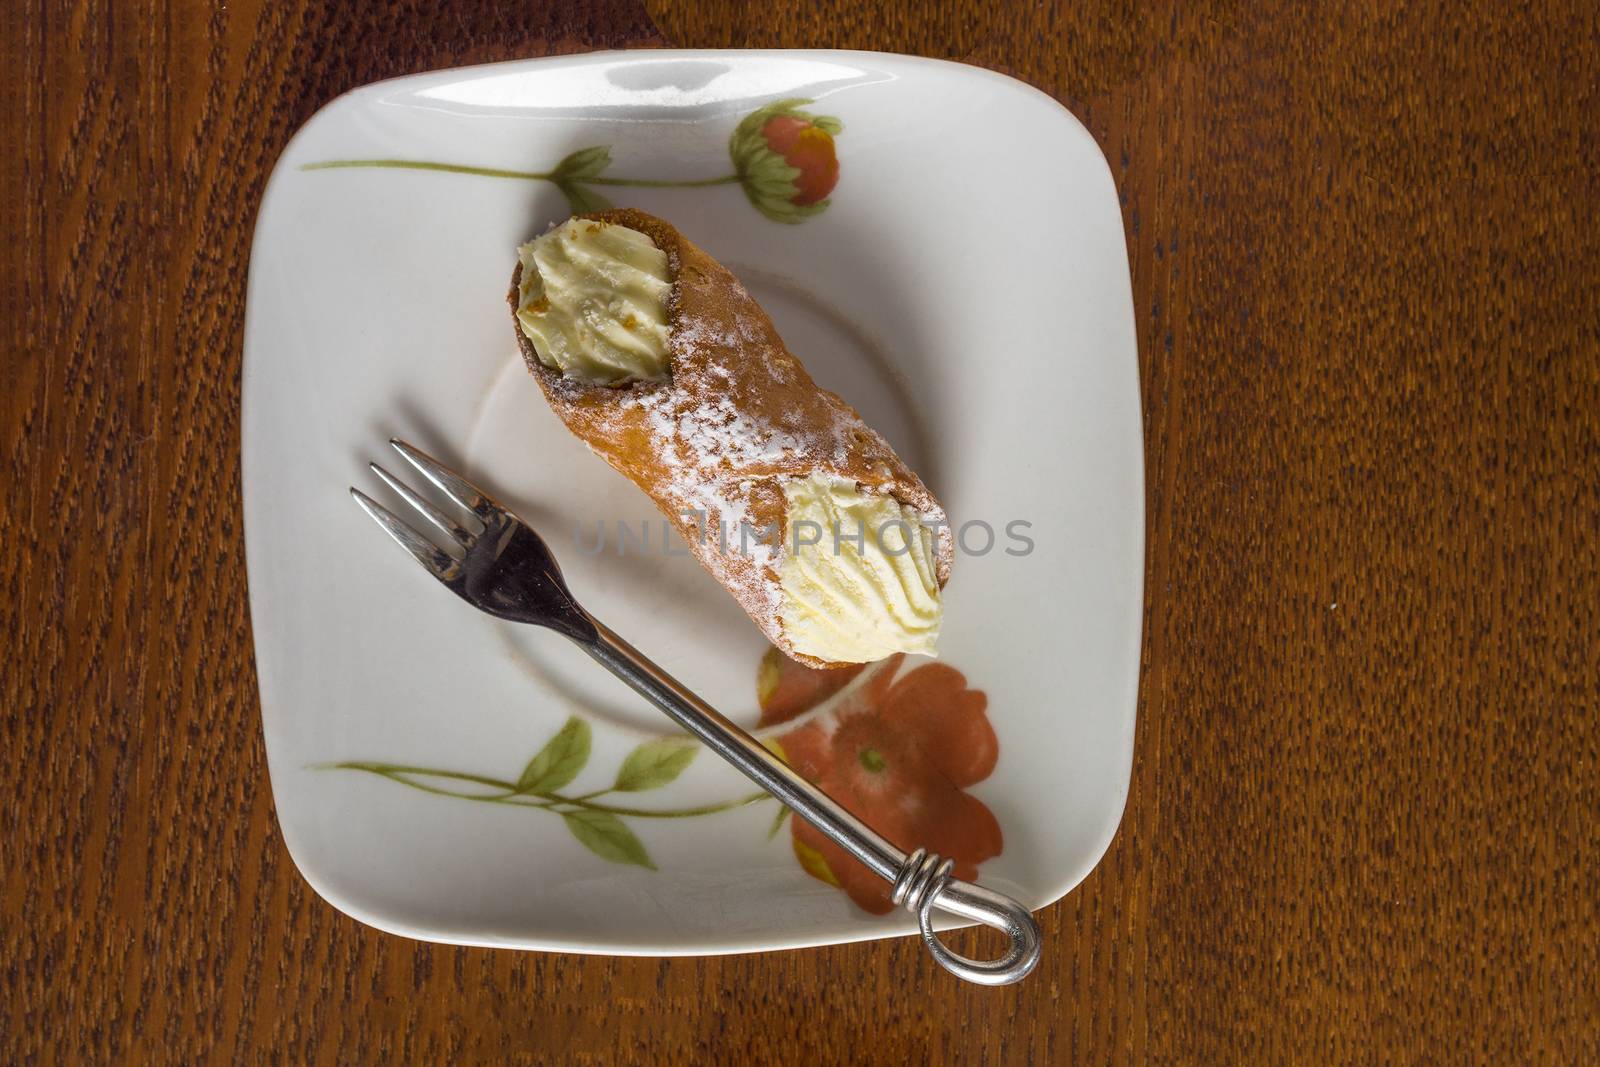 Canoli cake and a triple fork lie on a square, ceramic plate.